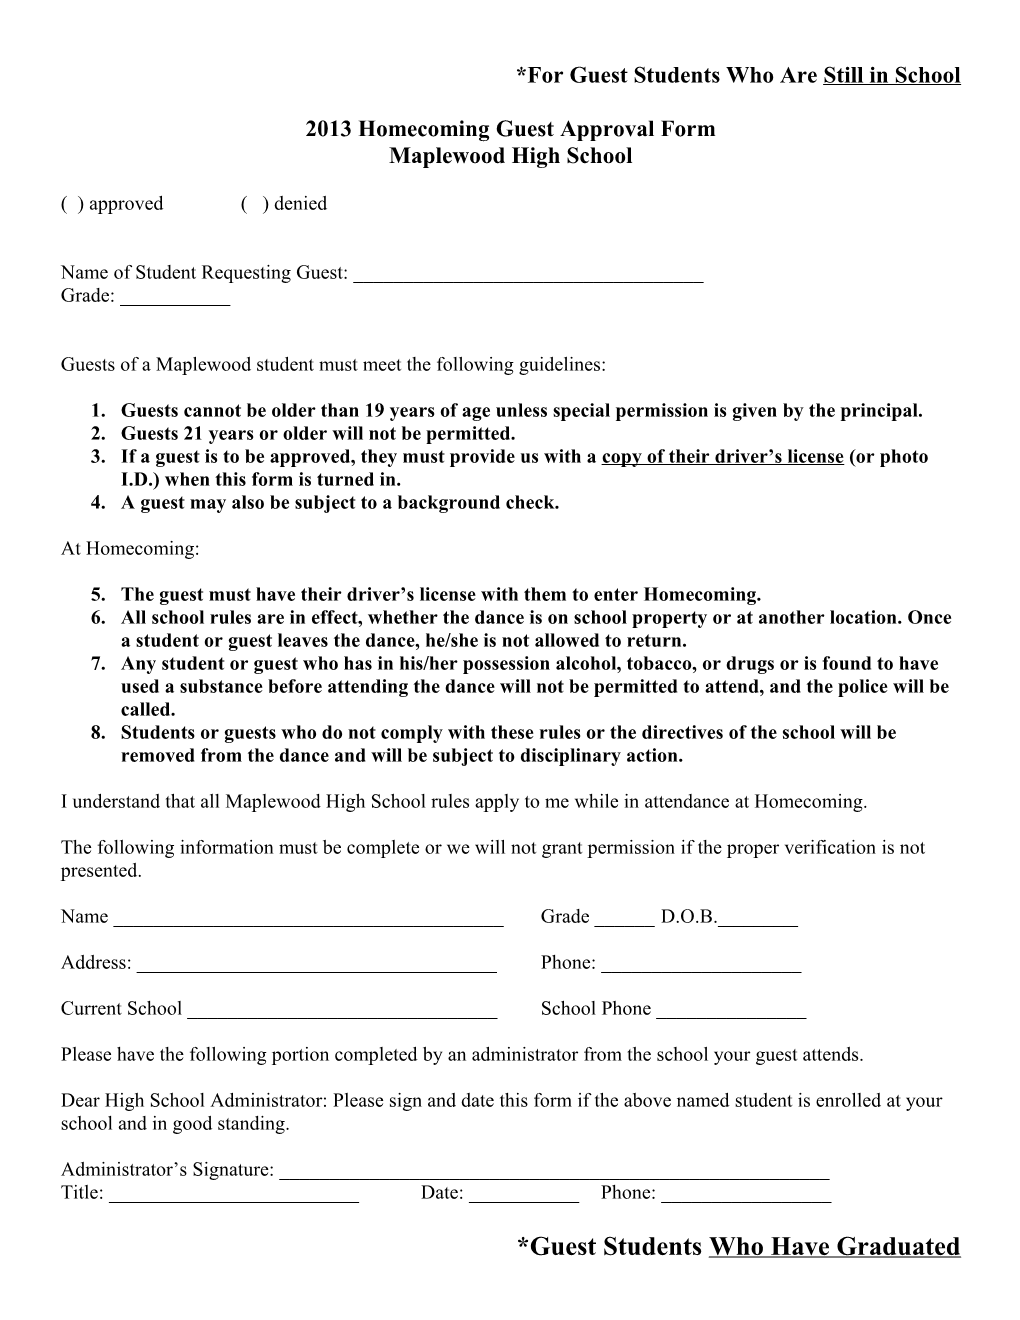 2009 Homecoming Guest Approval Form